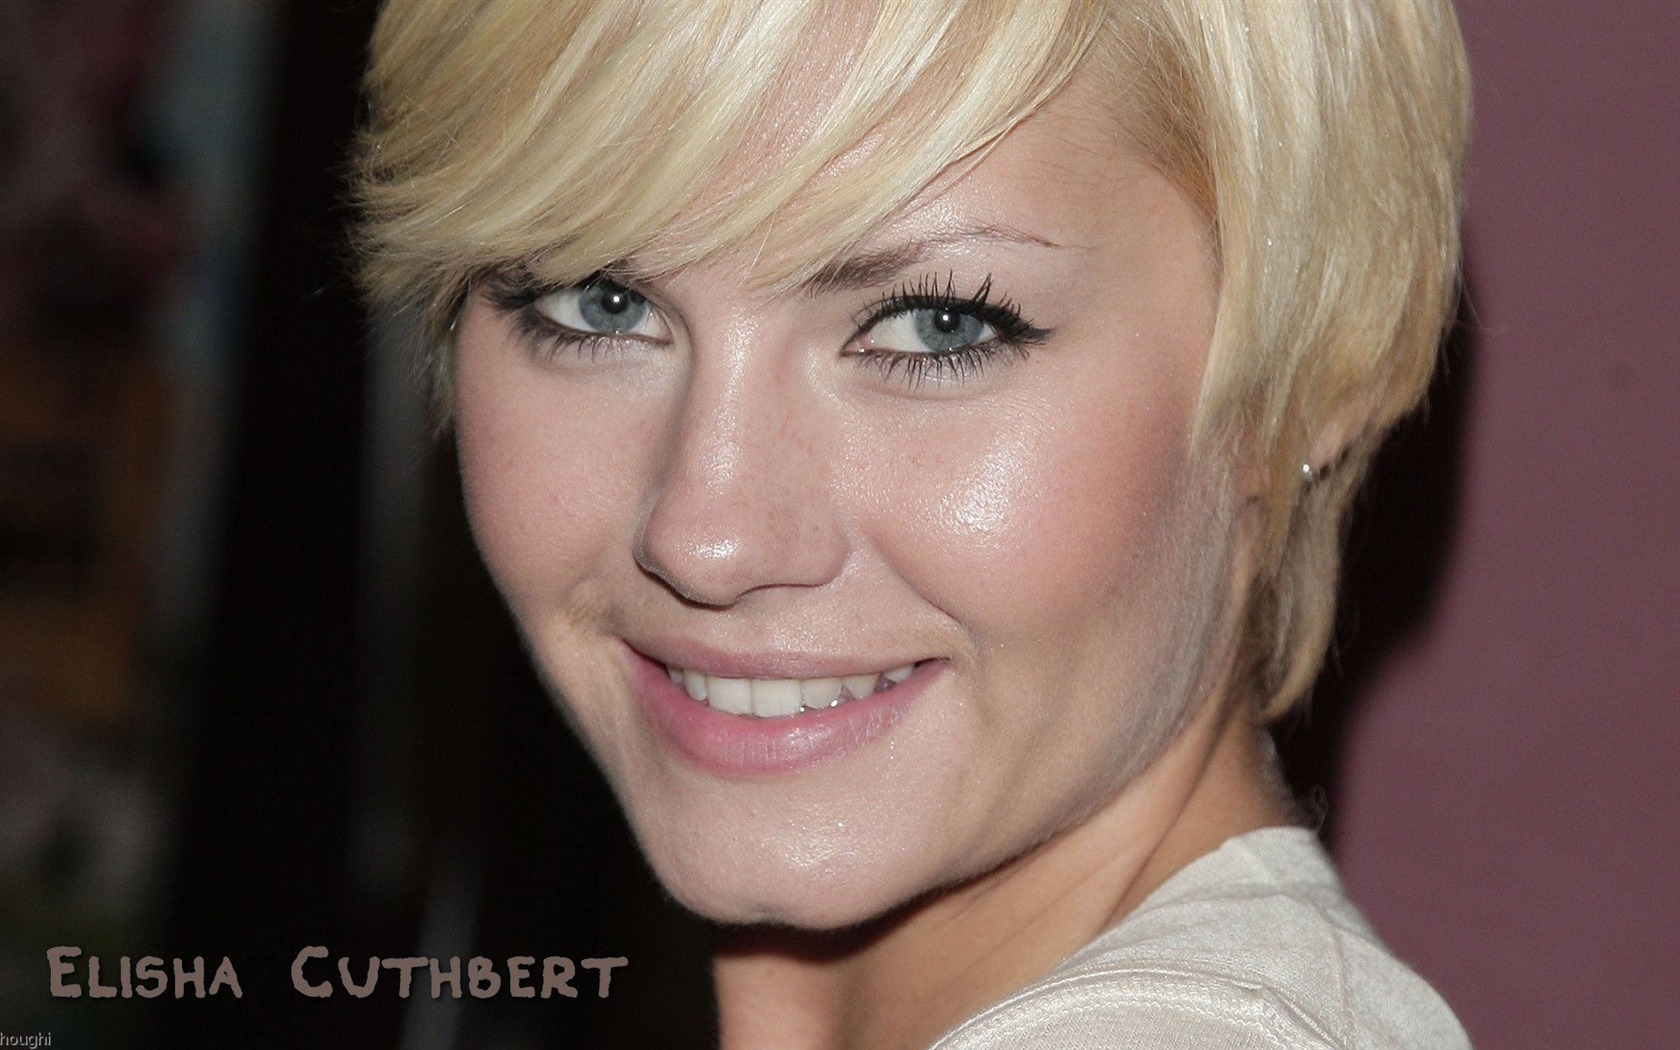 Elisha Cuthbert #023 - 1680x1050 Wallpapers Pictures Photos Images